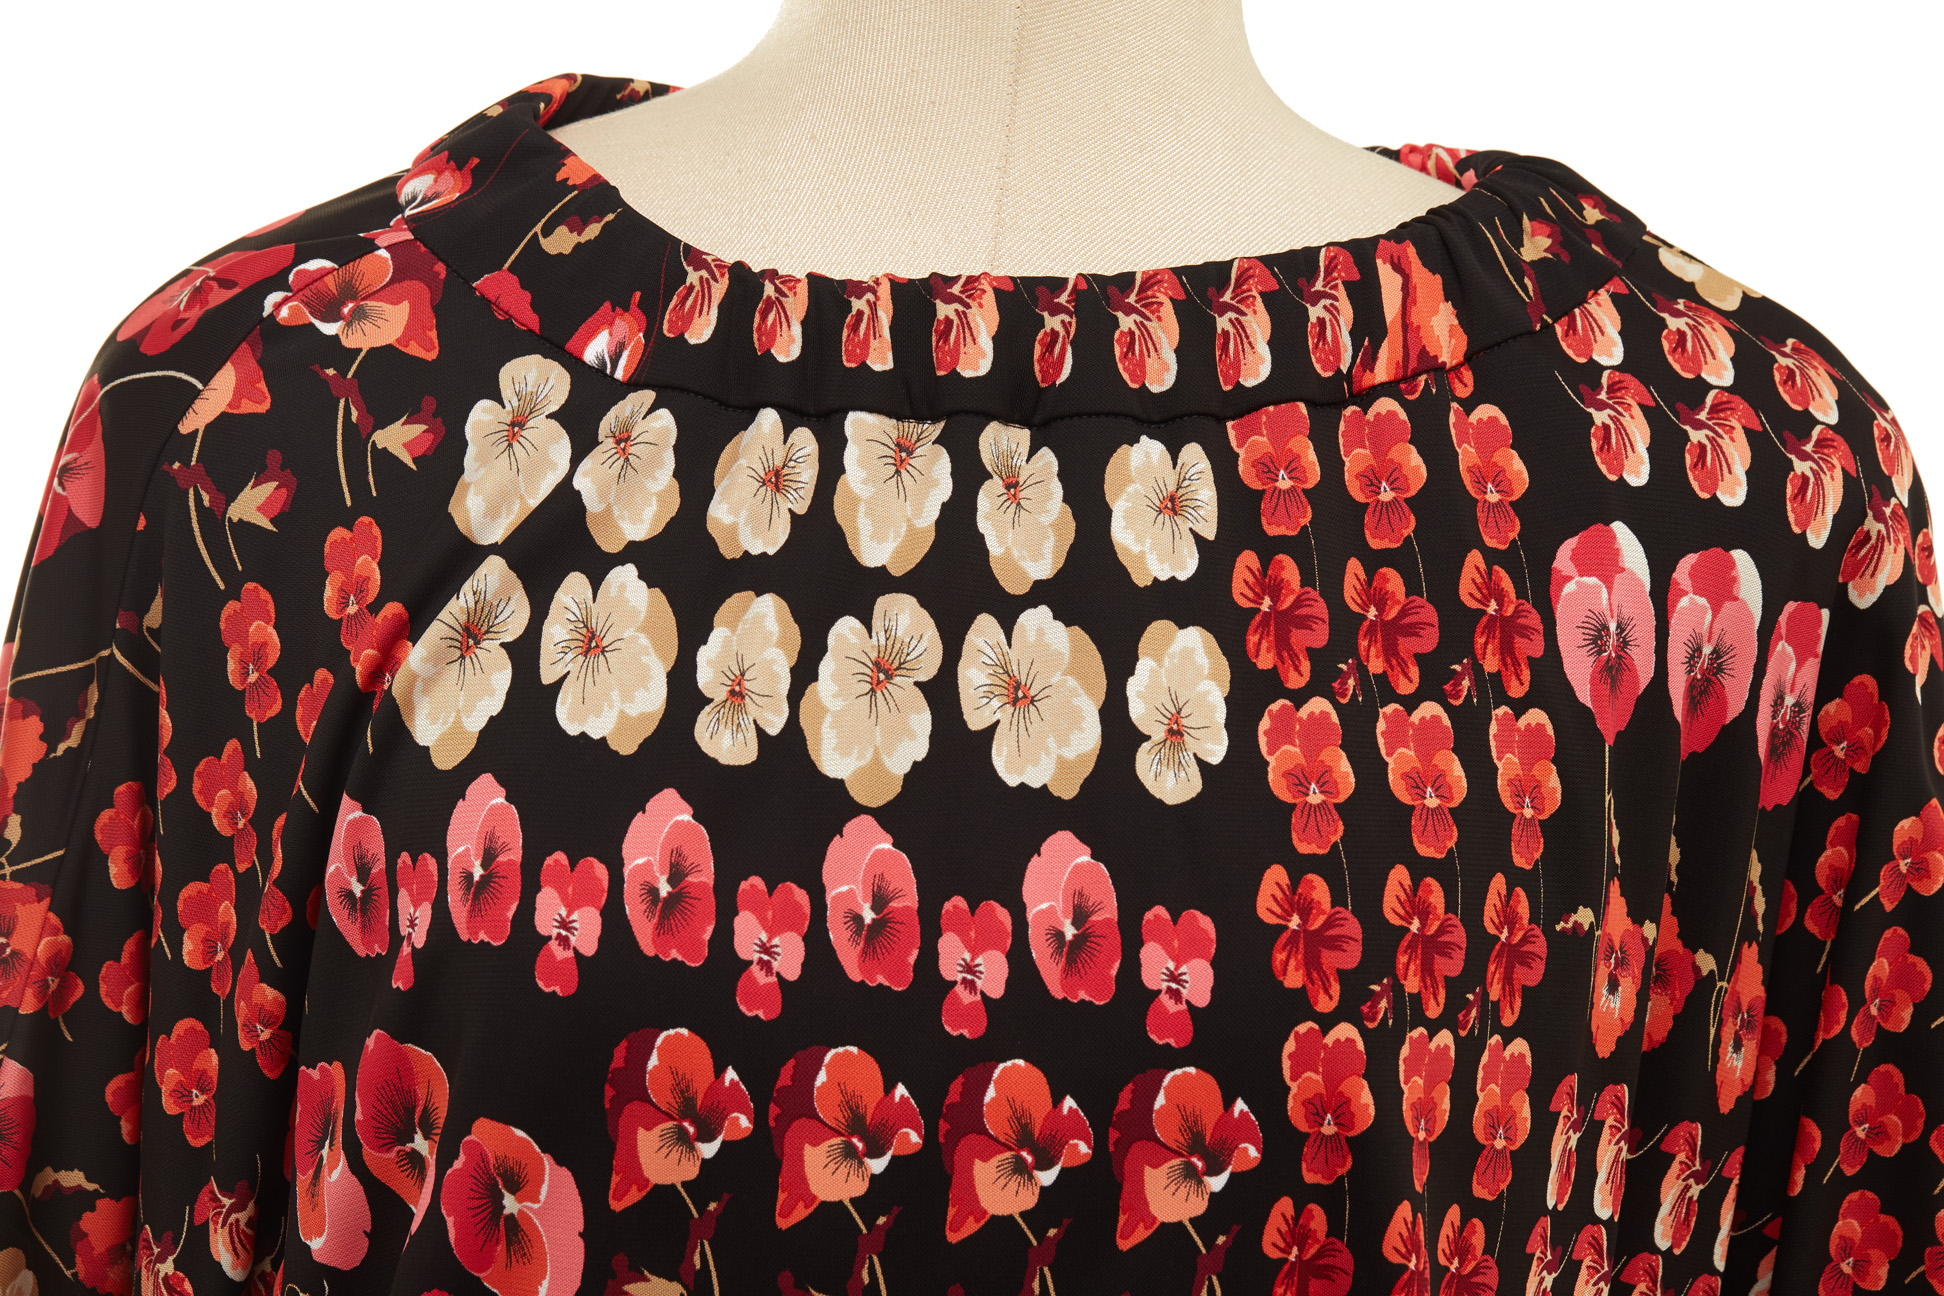 A GUCCI RED AND BLACK FLORAL PRINTED DRESS - Image 2 of 3